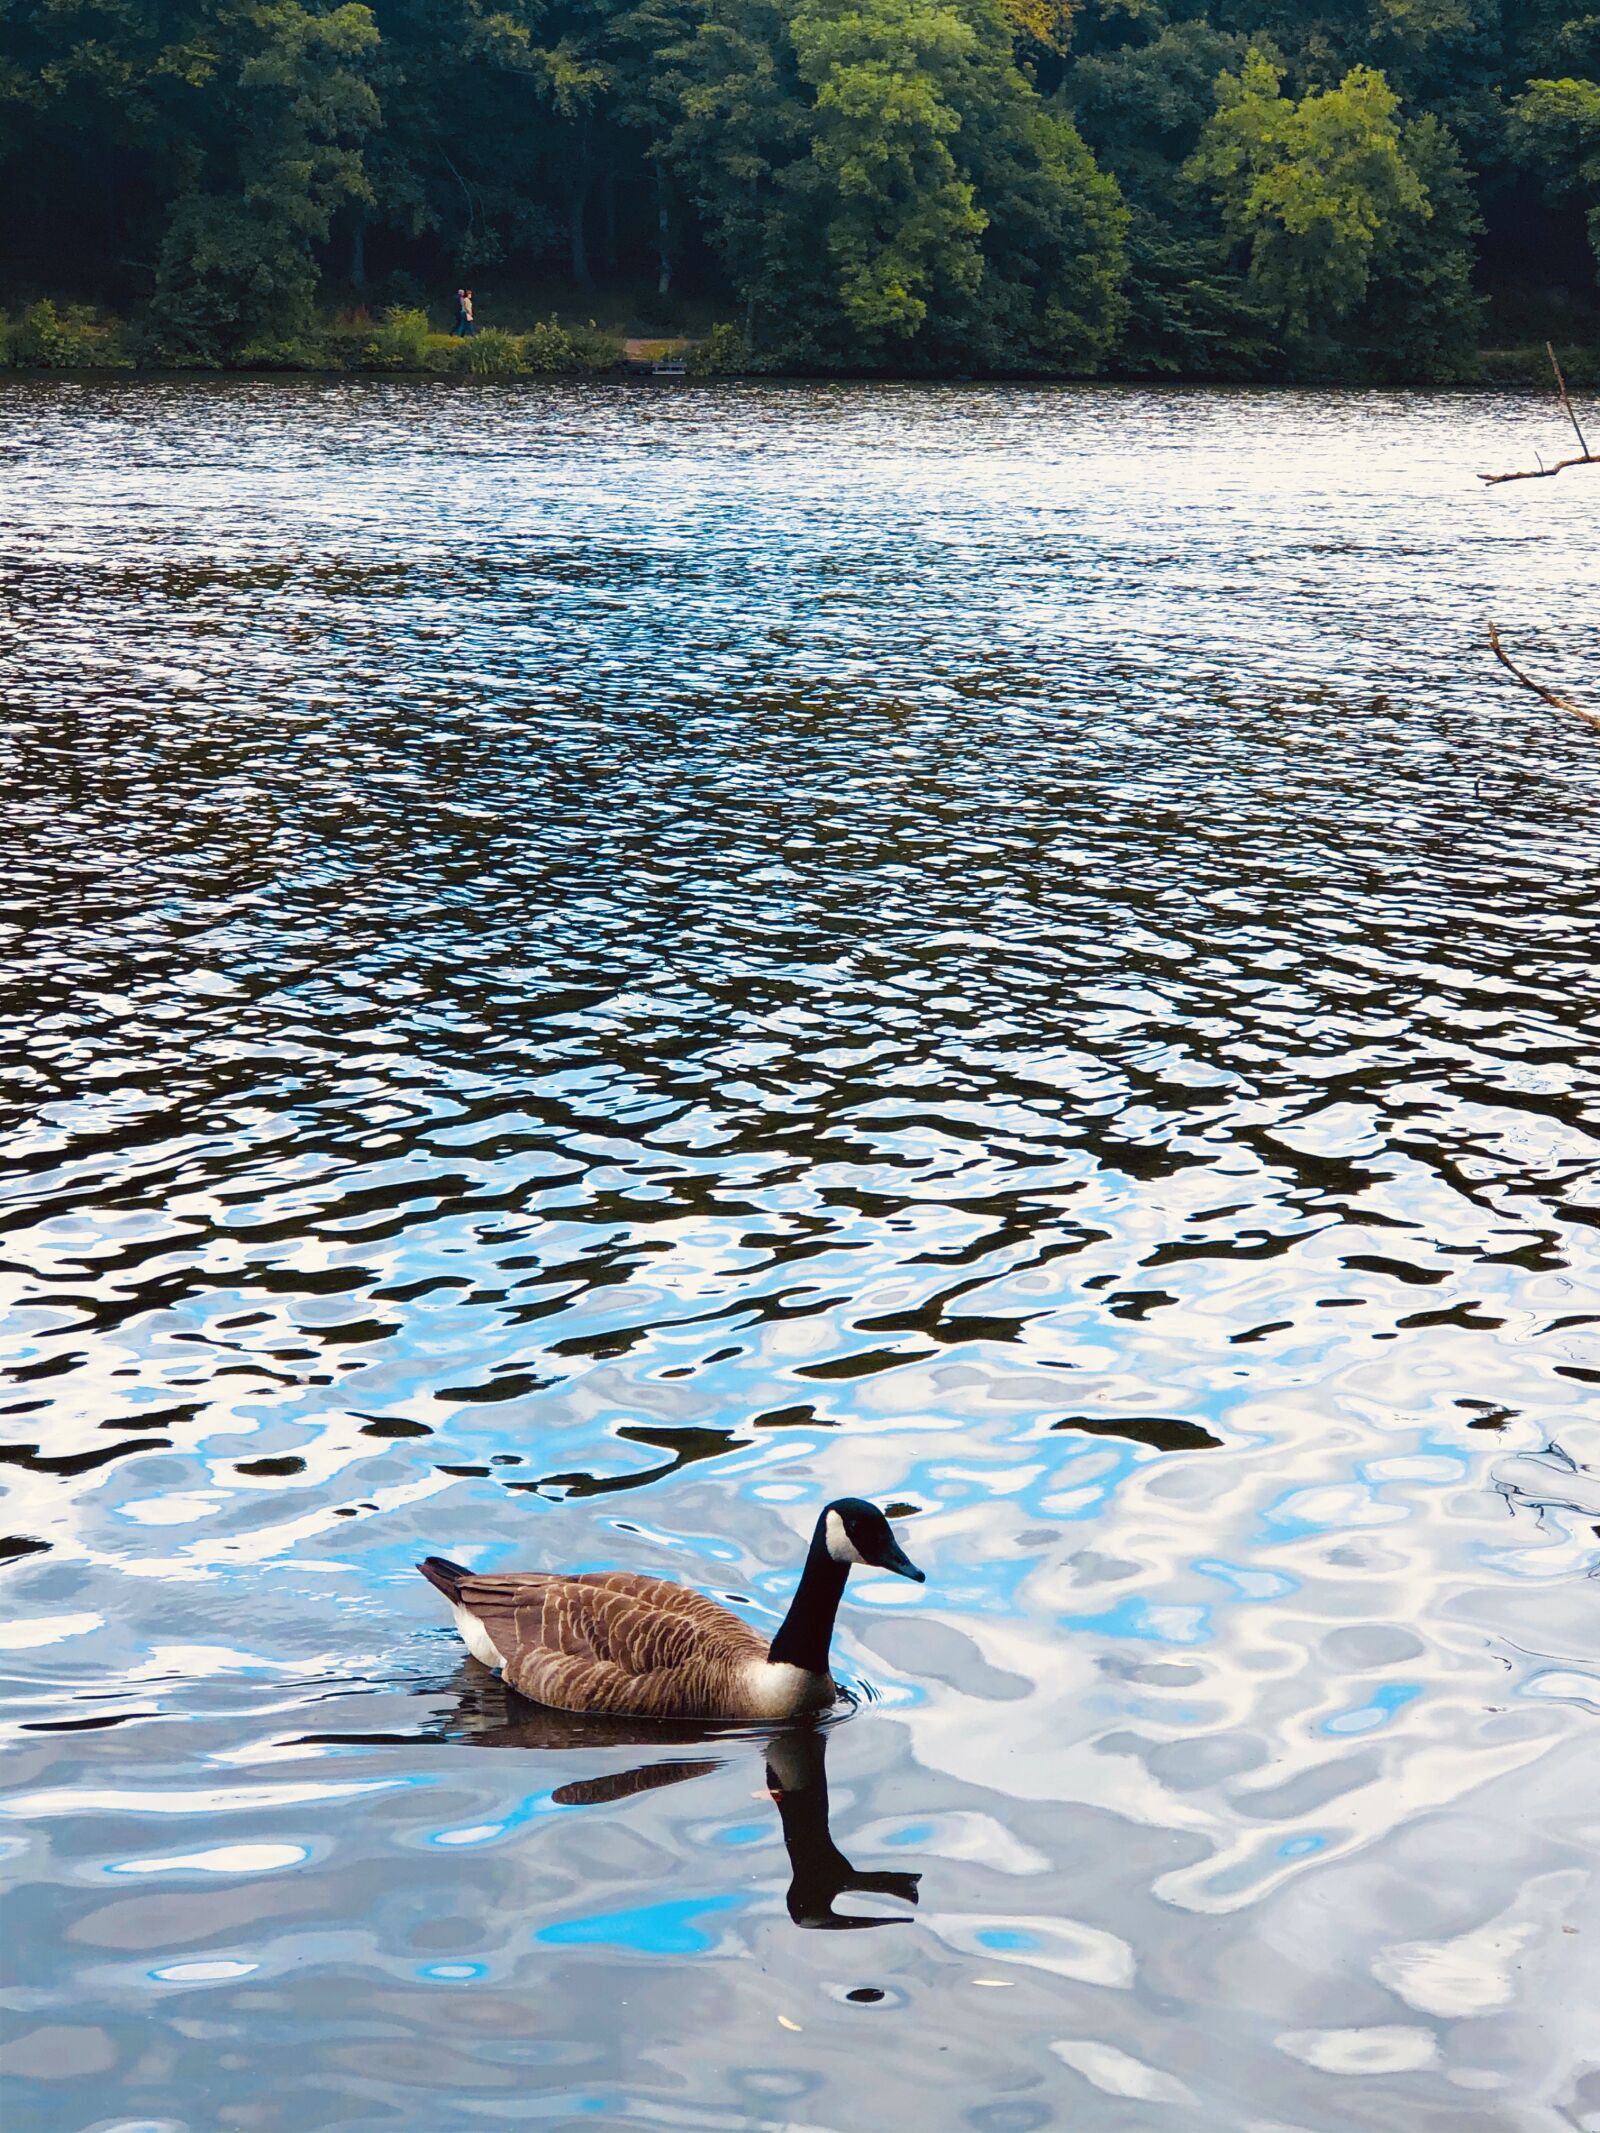 iPhone 8 Plus back dual camera 6.6mm f/2.8 sample photo. Duck, lake, nature photography